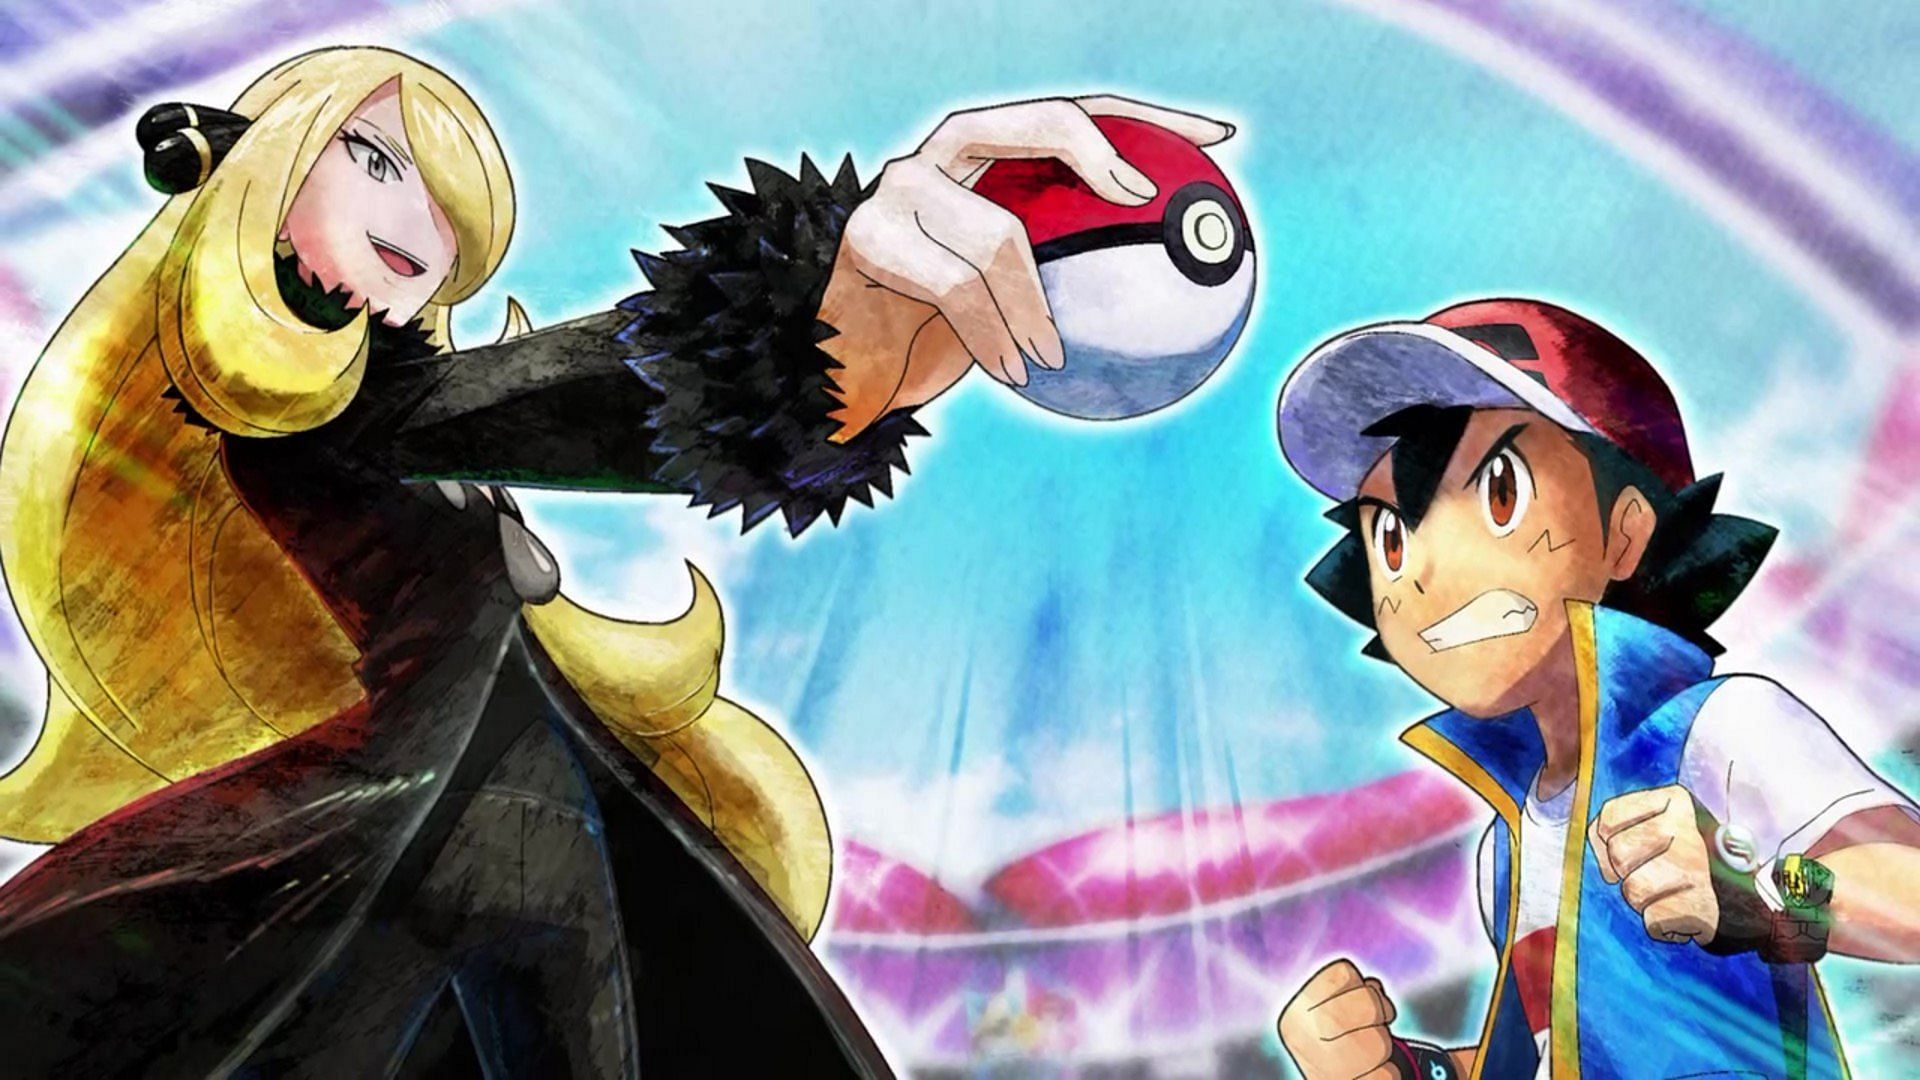 Ash will defeat Cynthia in the semi-finals (Image via OLM, Inc)